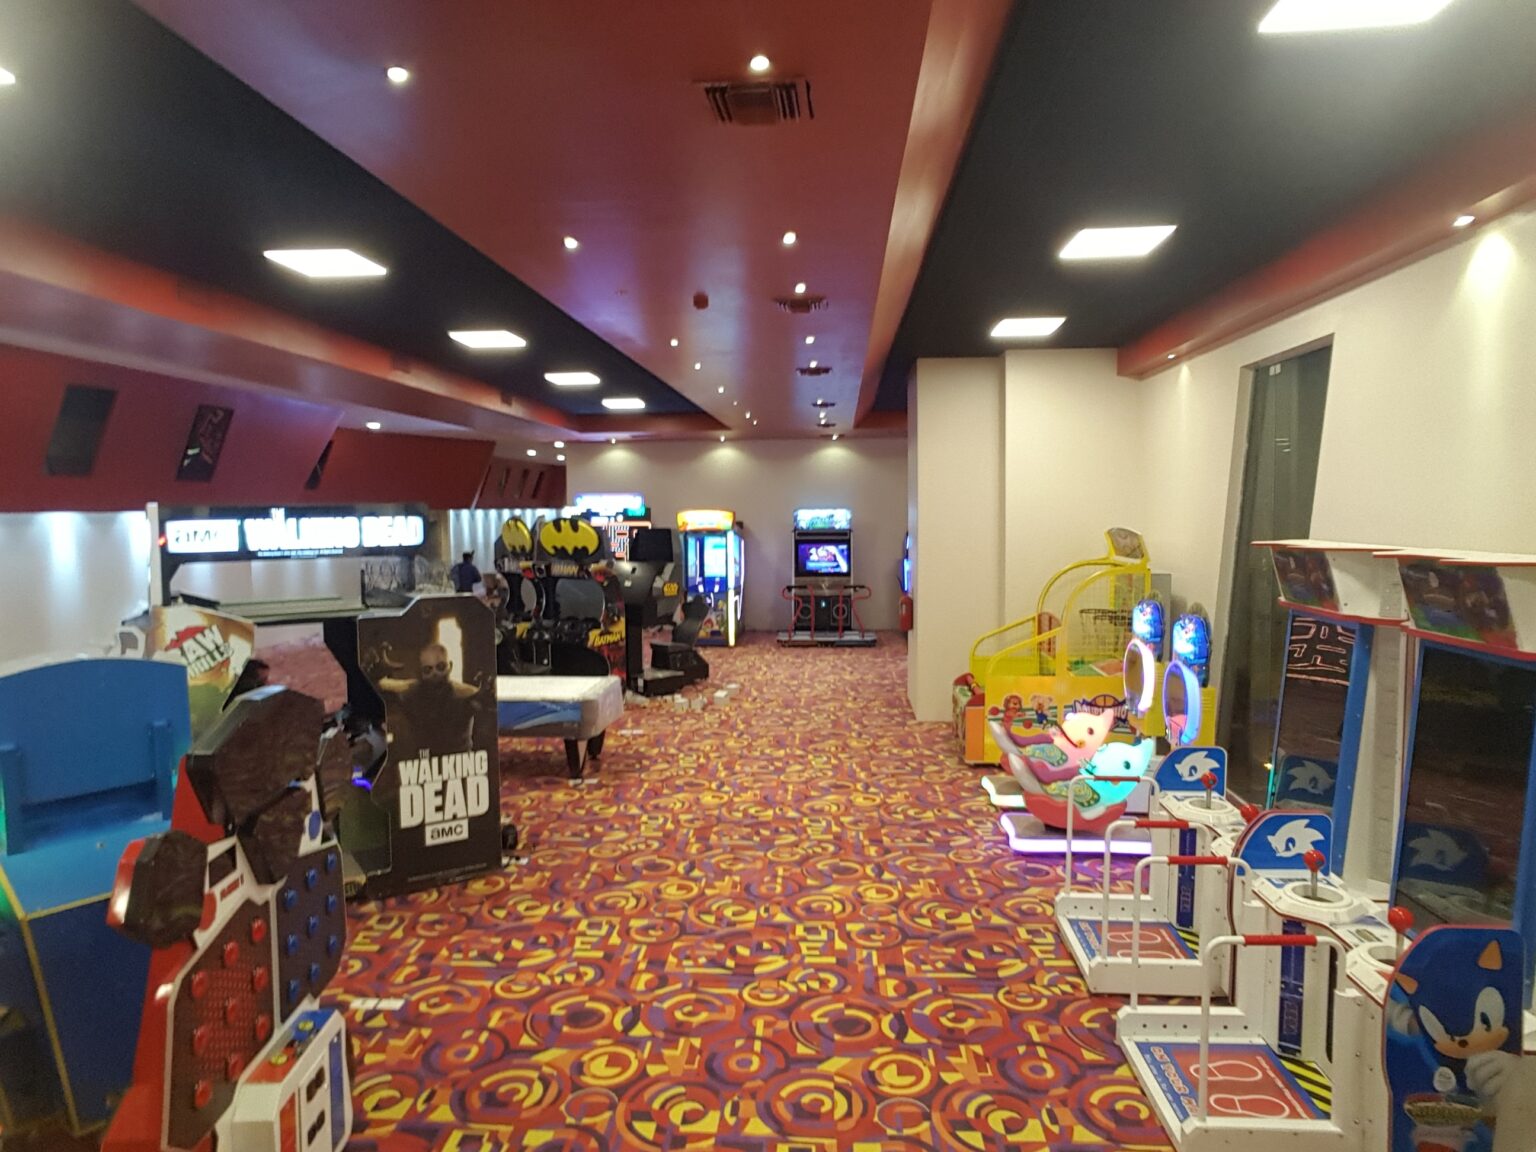 Arcade games installed by Planet Arcade in a movie theater